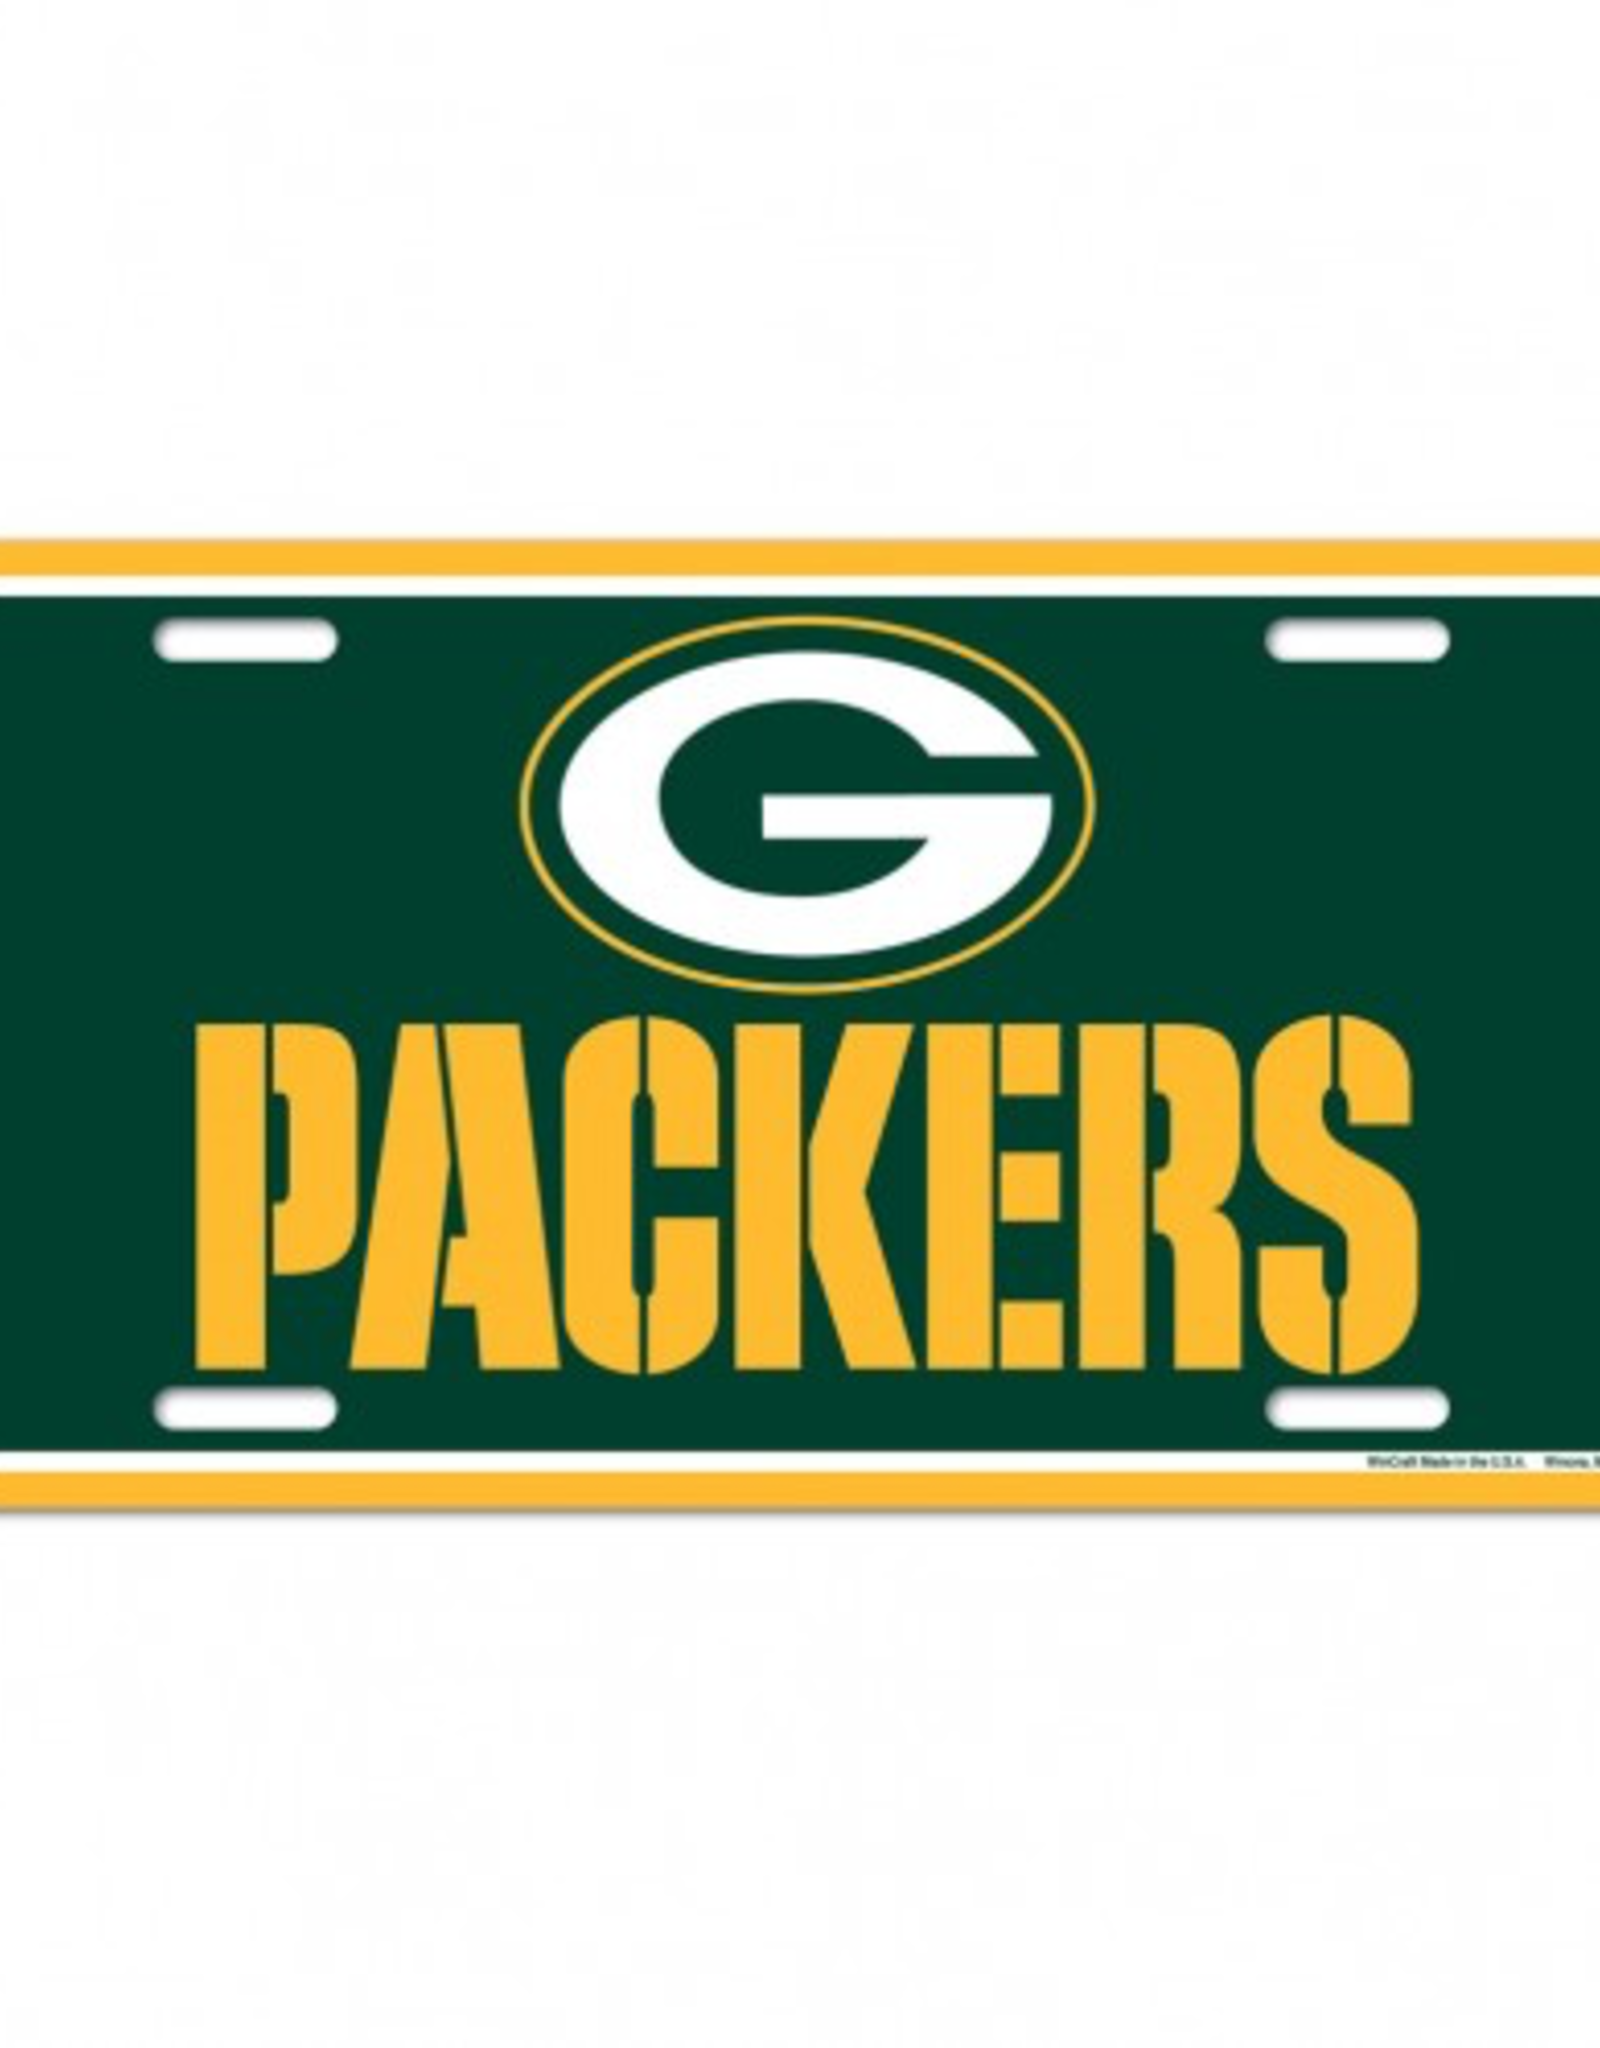 WINCRAFT Green Bay Packers License Plate